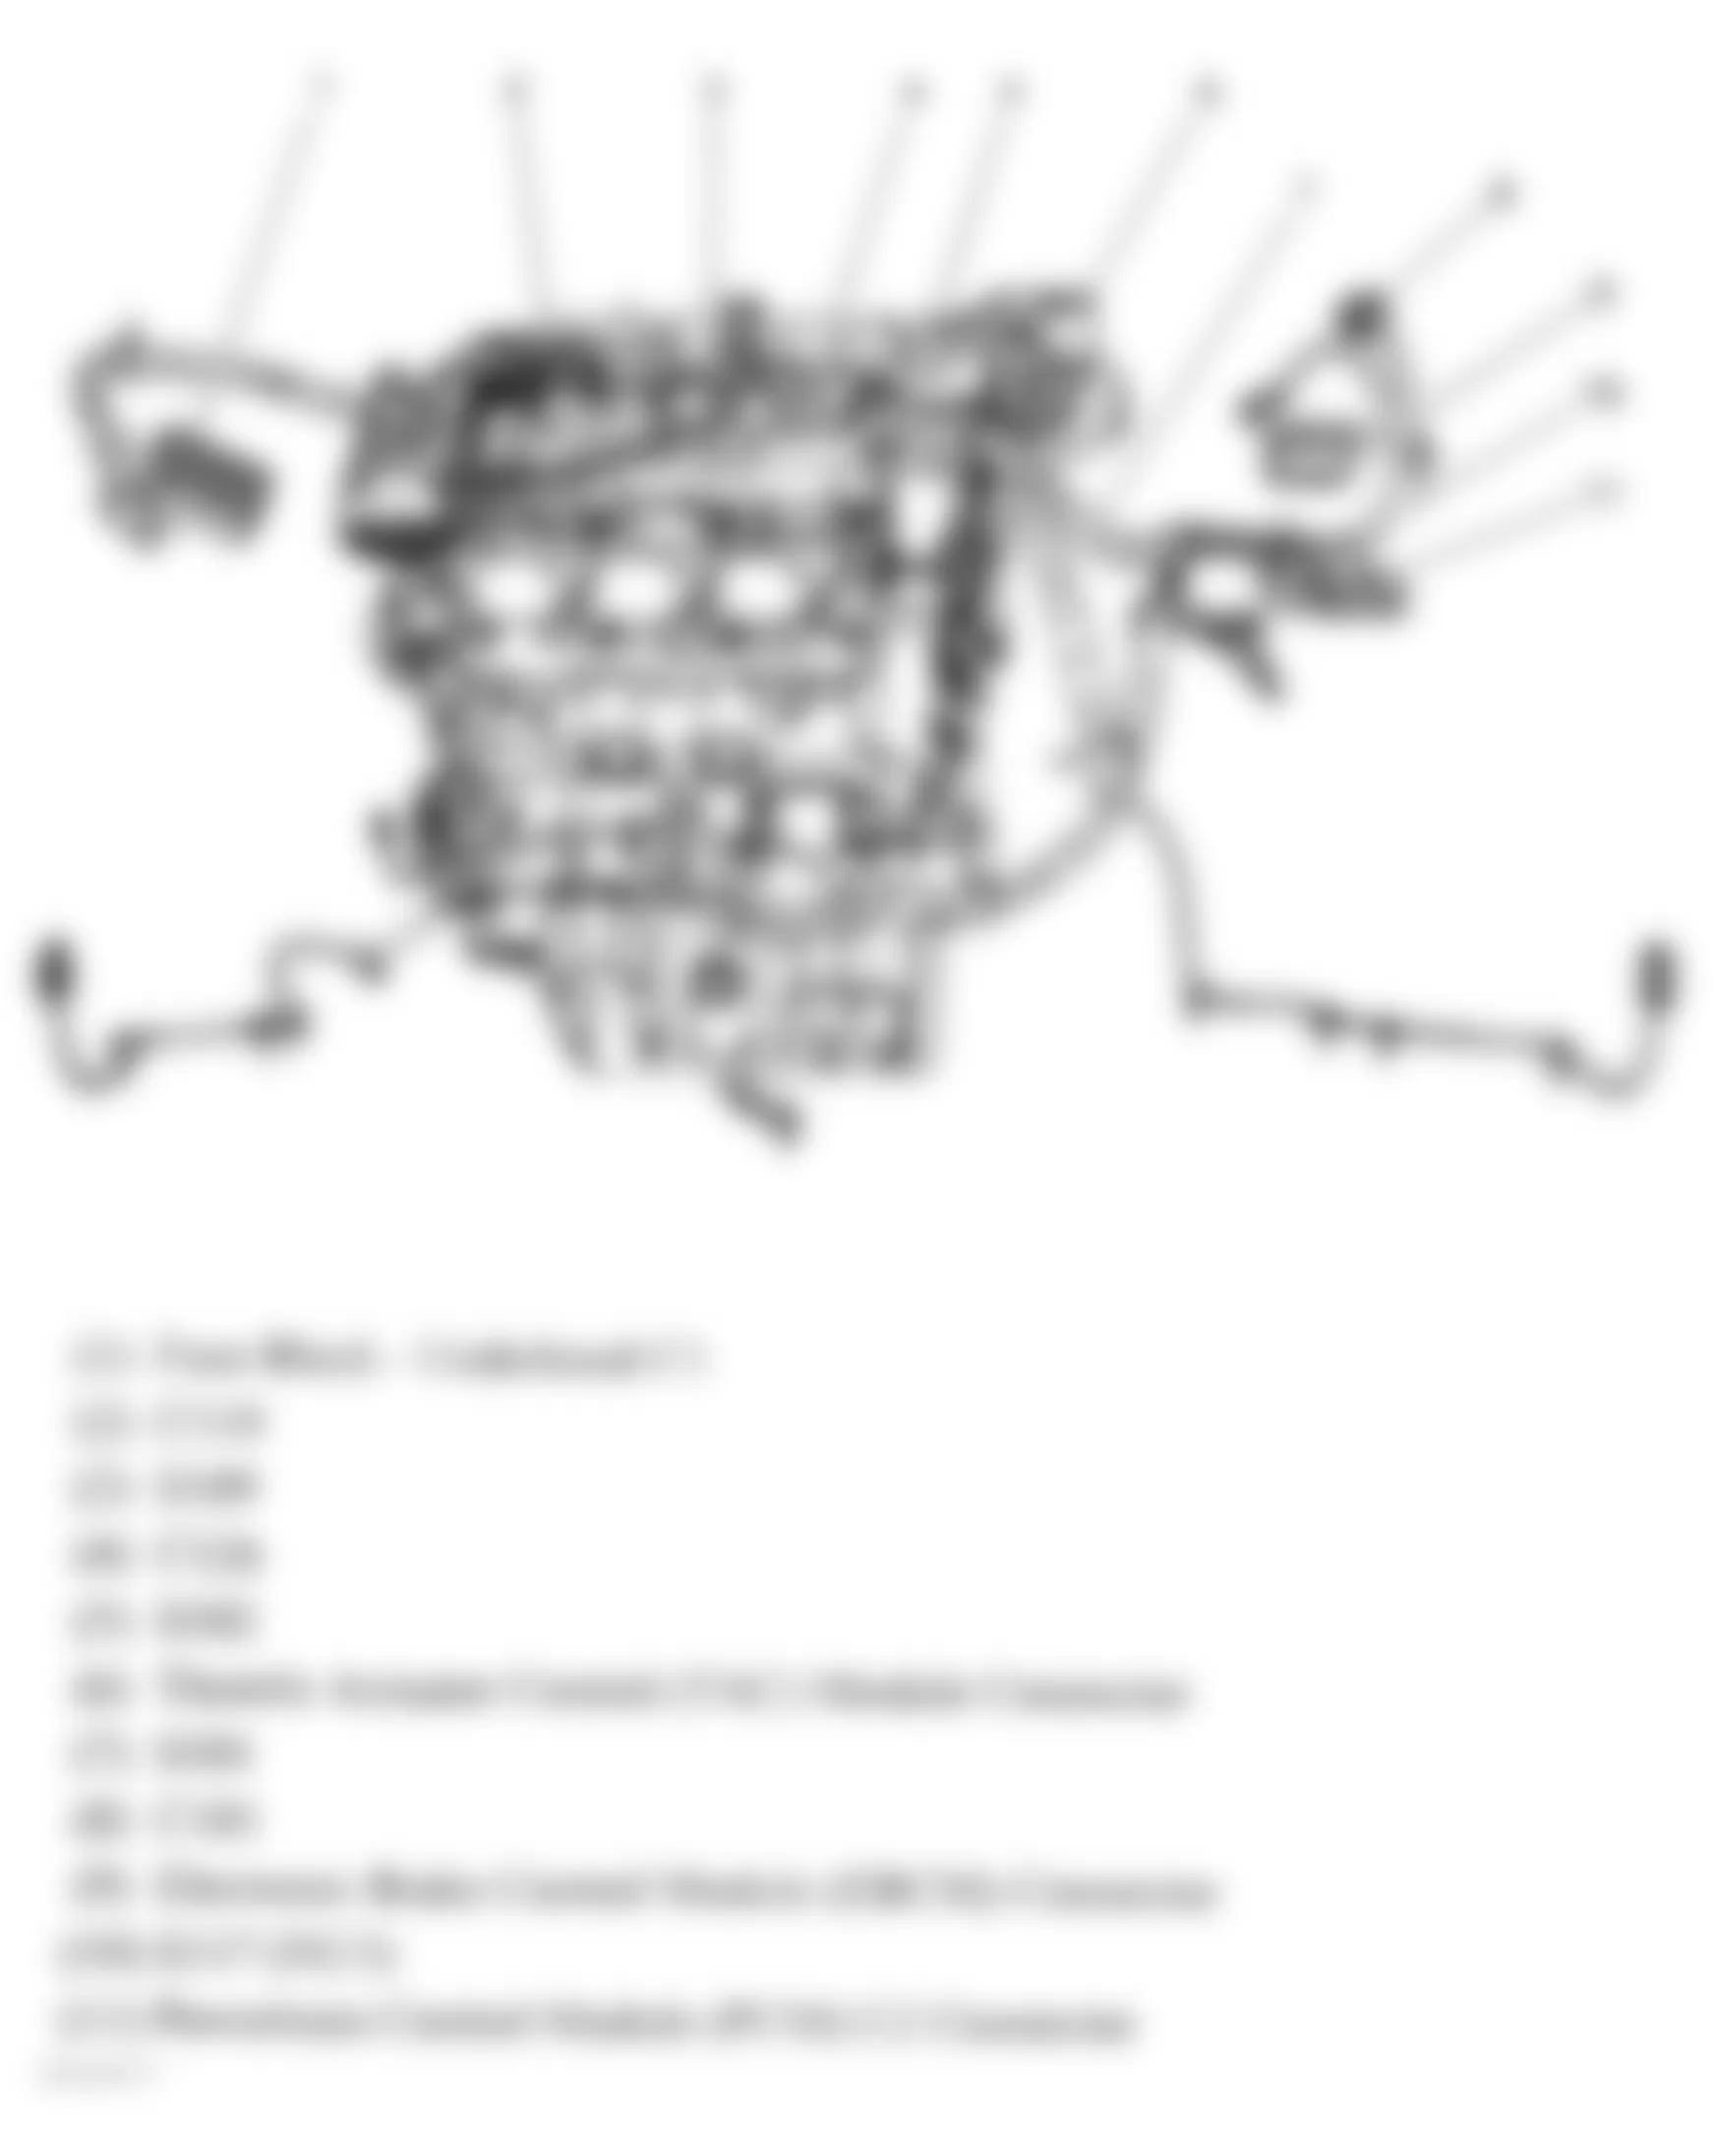 Buick LaCrosse CXL 2005 - Component Locations -  Left Side Of Engine (3.6L)